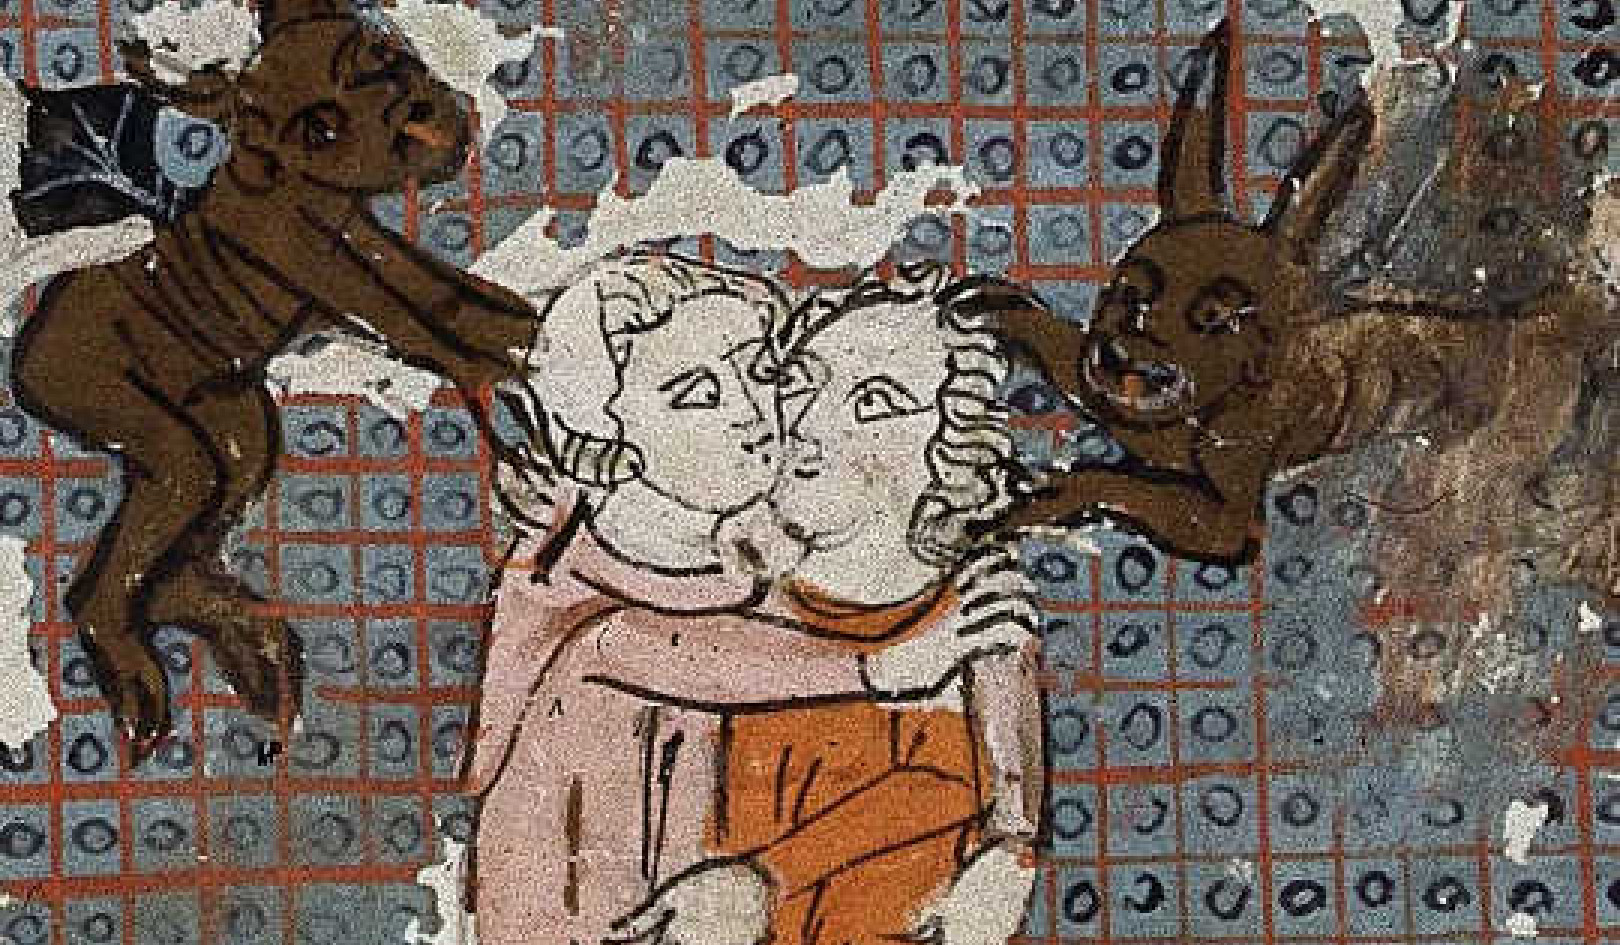 Theories About The Relationship Between Demons, Illness And Sex Have A Long History